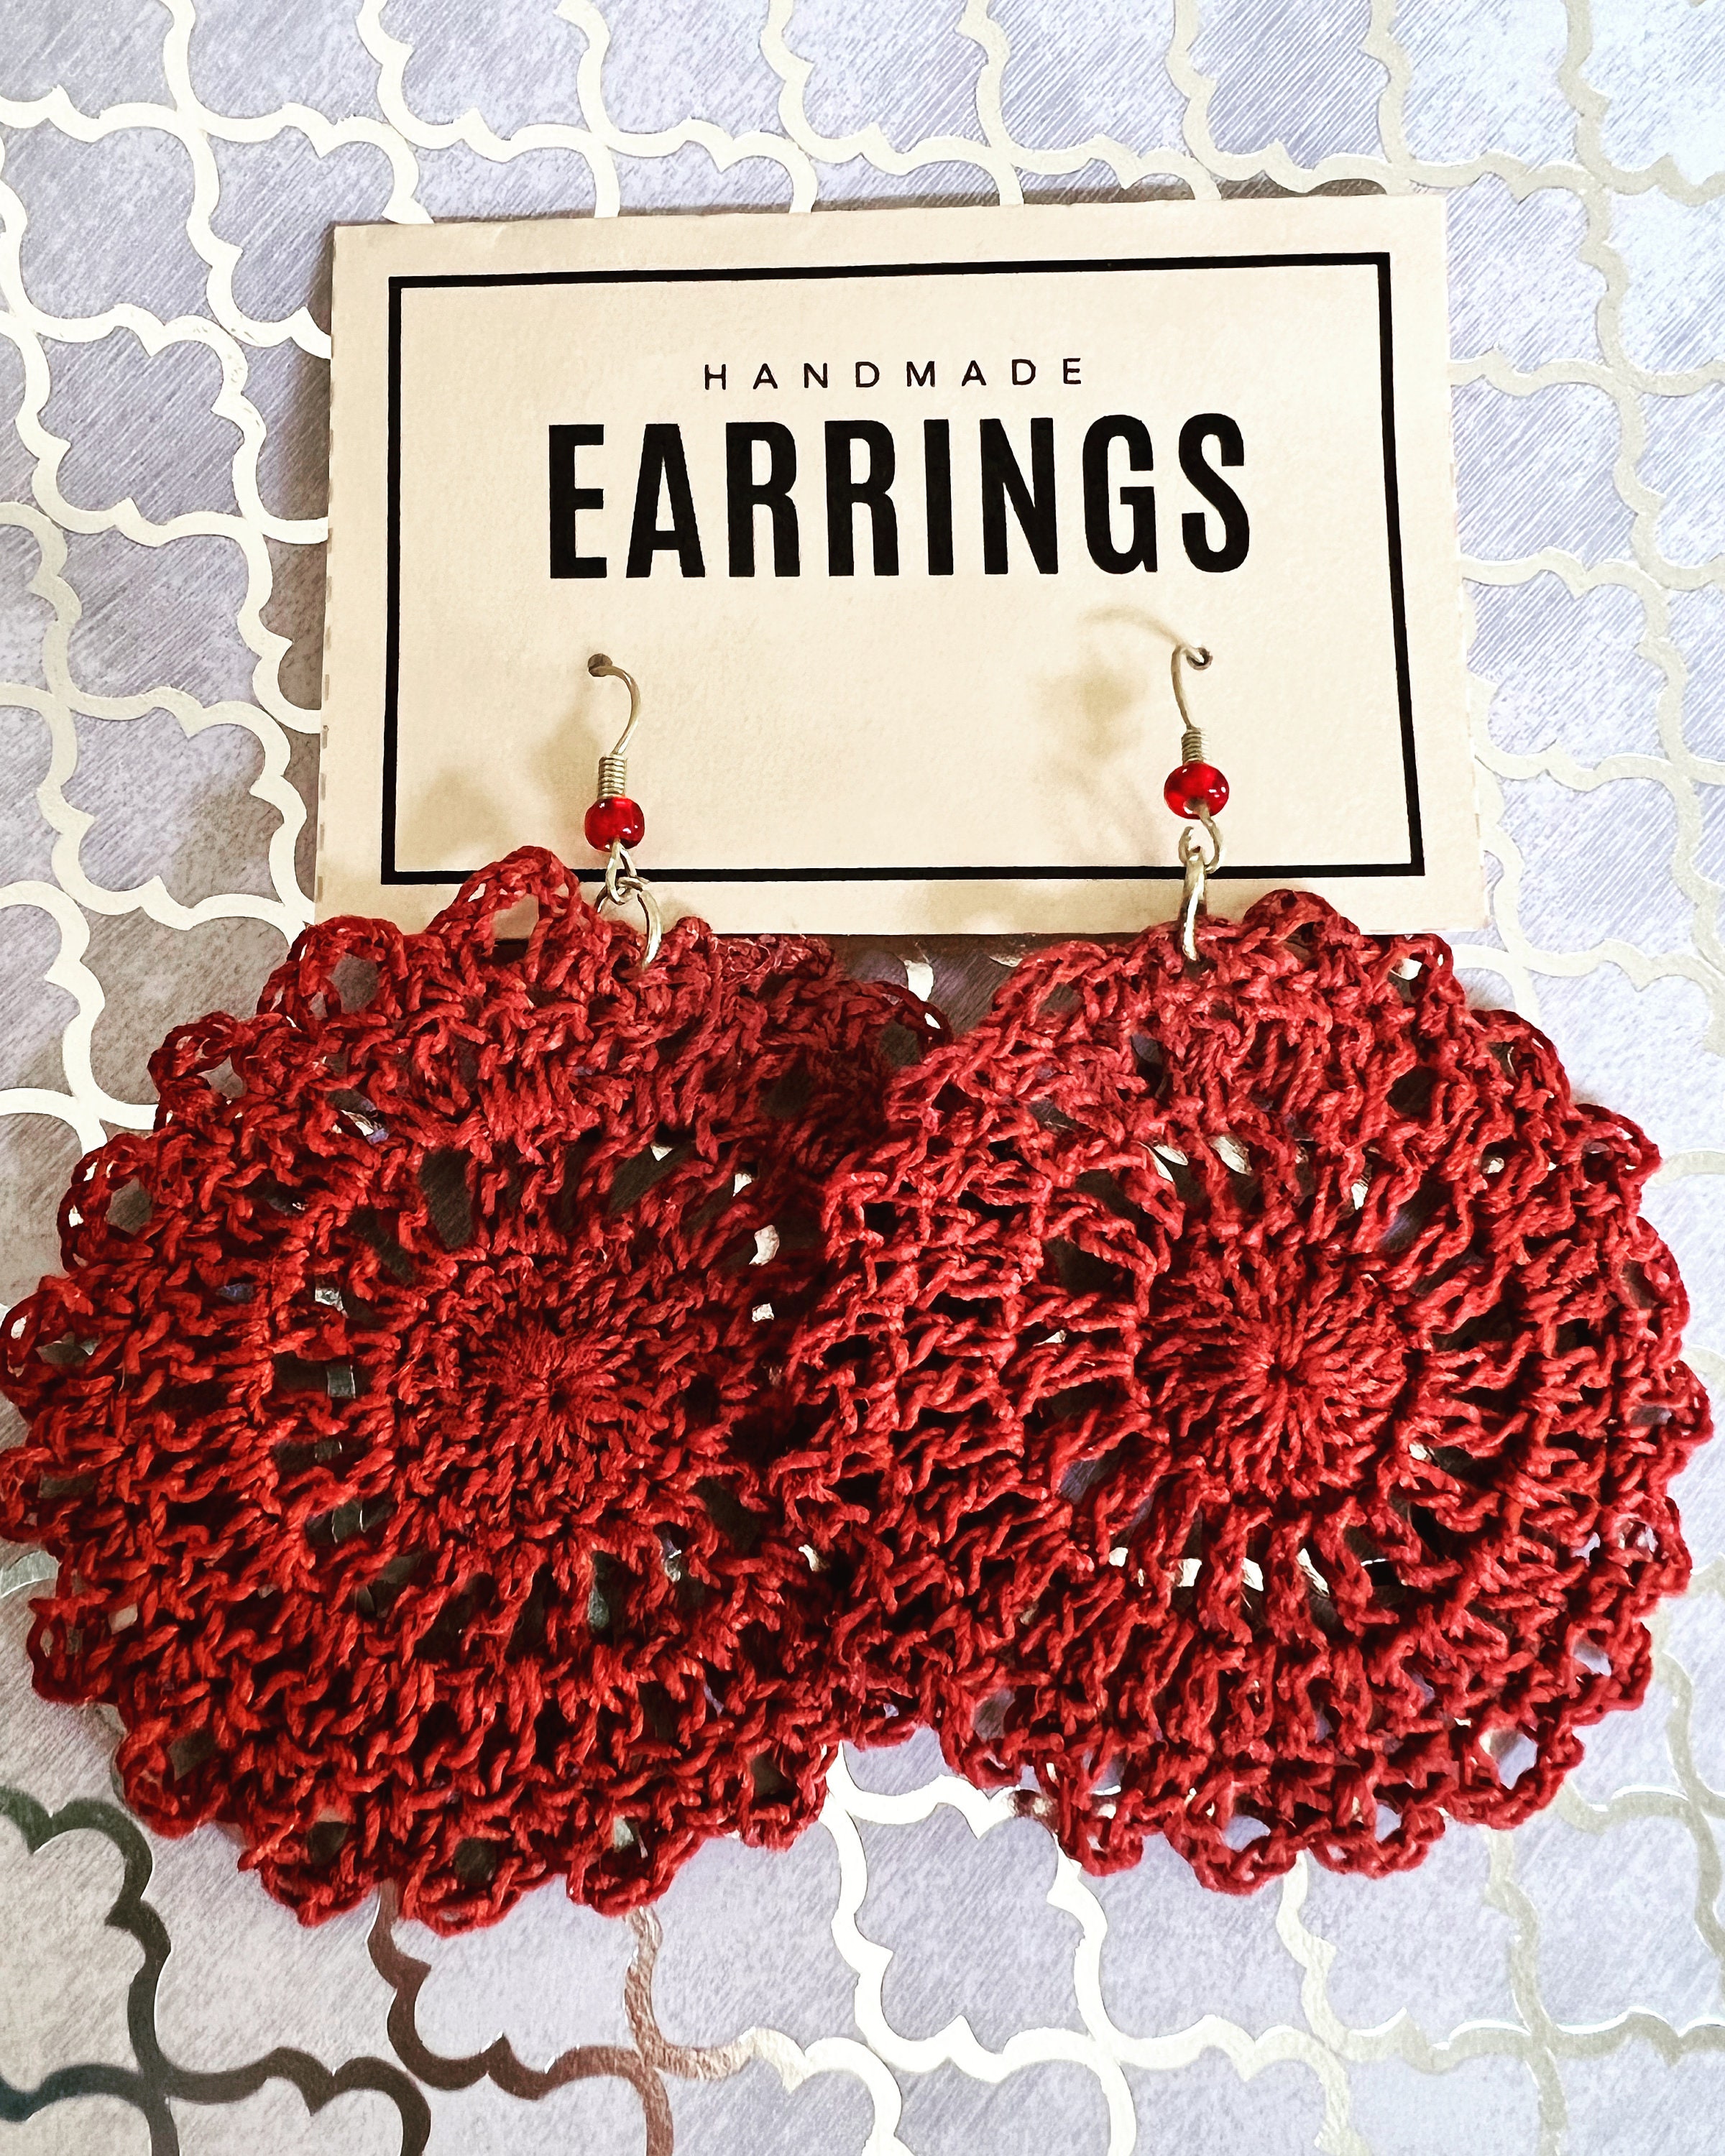 30-Minute Earrings to Crochet - A Collection of Free Crochet Motif Patterns  - HubPages